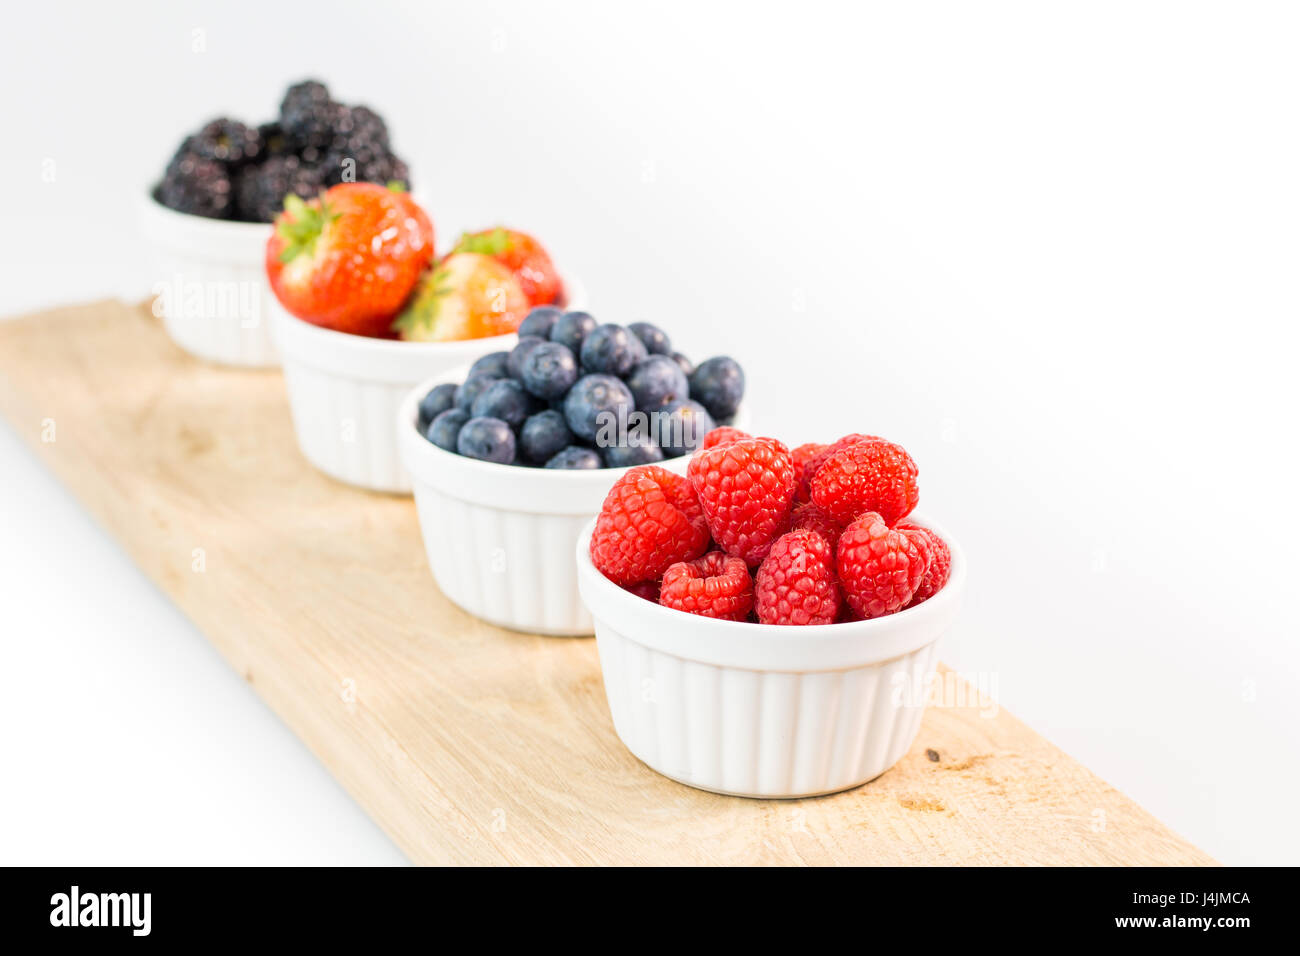 Raspberries, blueberries, strawberries and blackberries on wooden cutting board with shallow depth of field Stock Photo